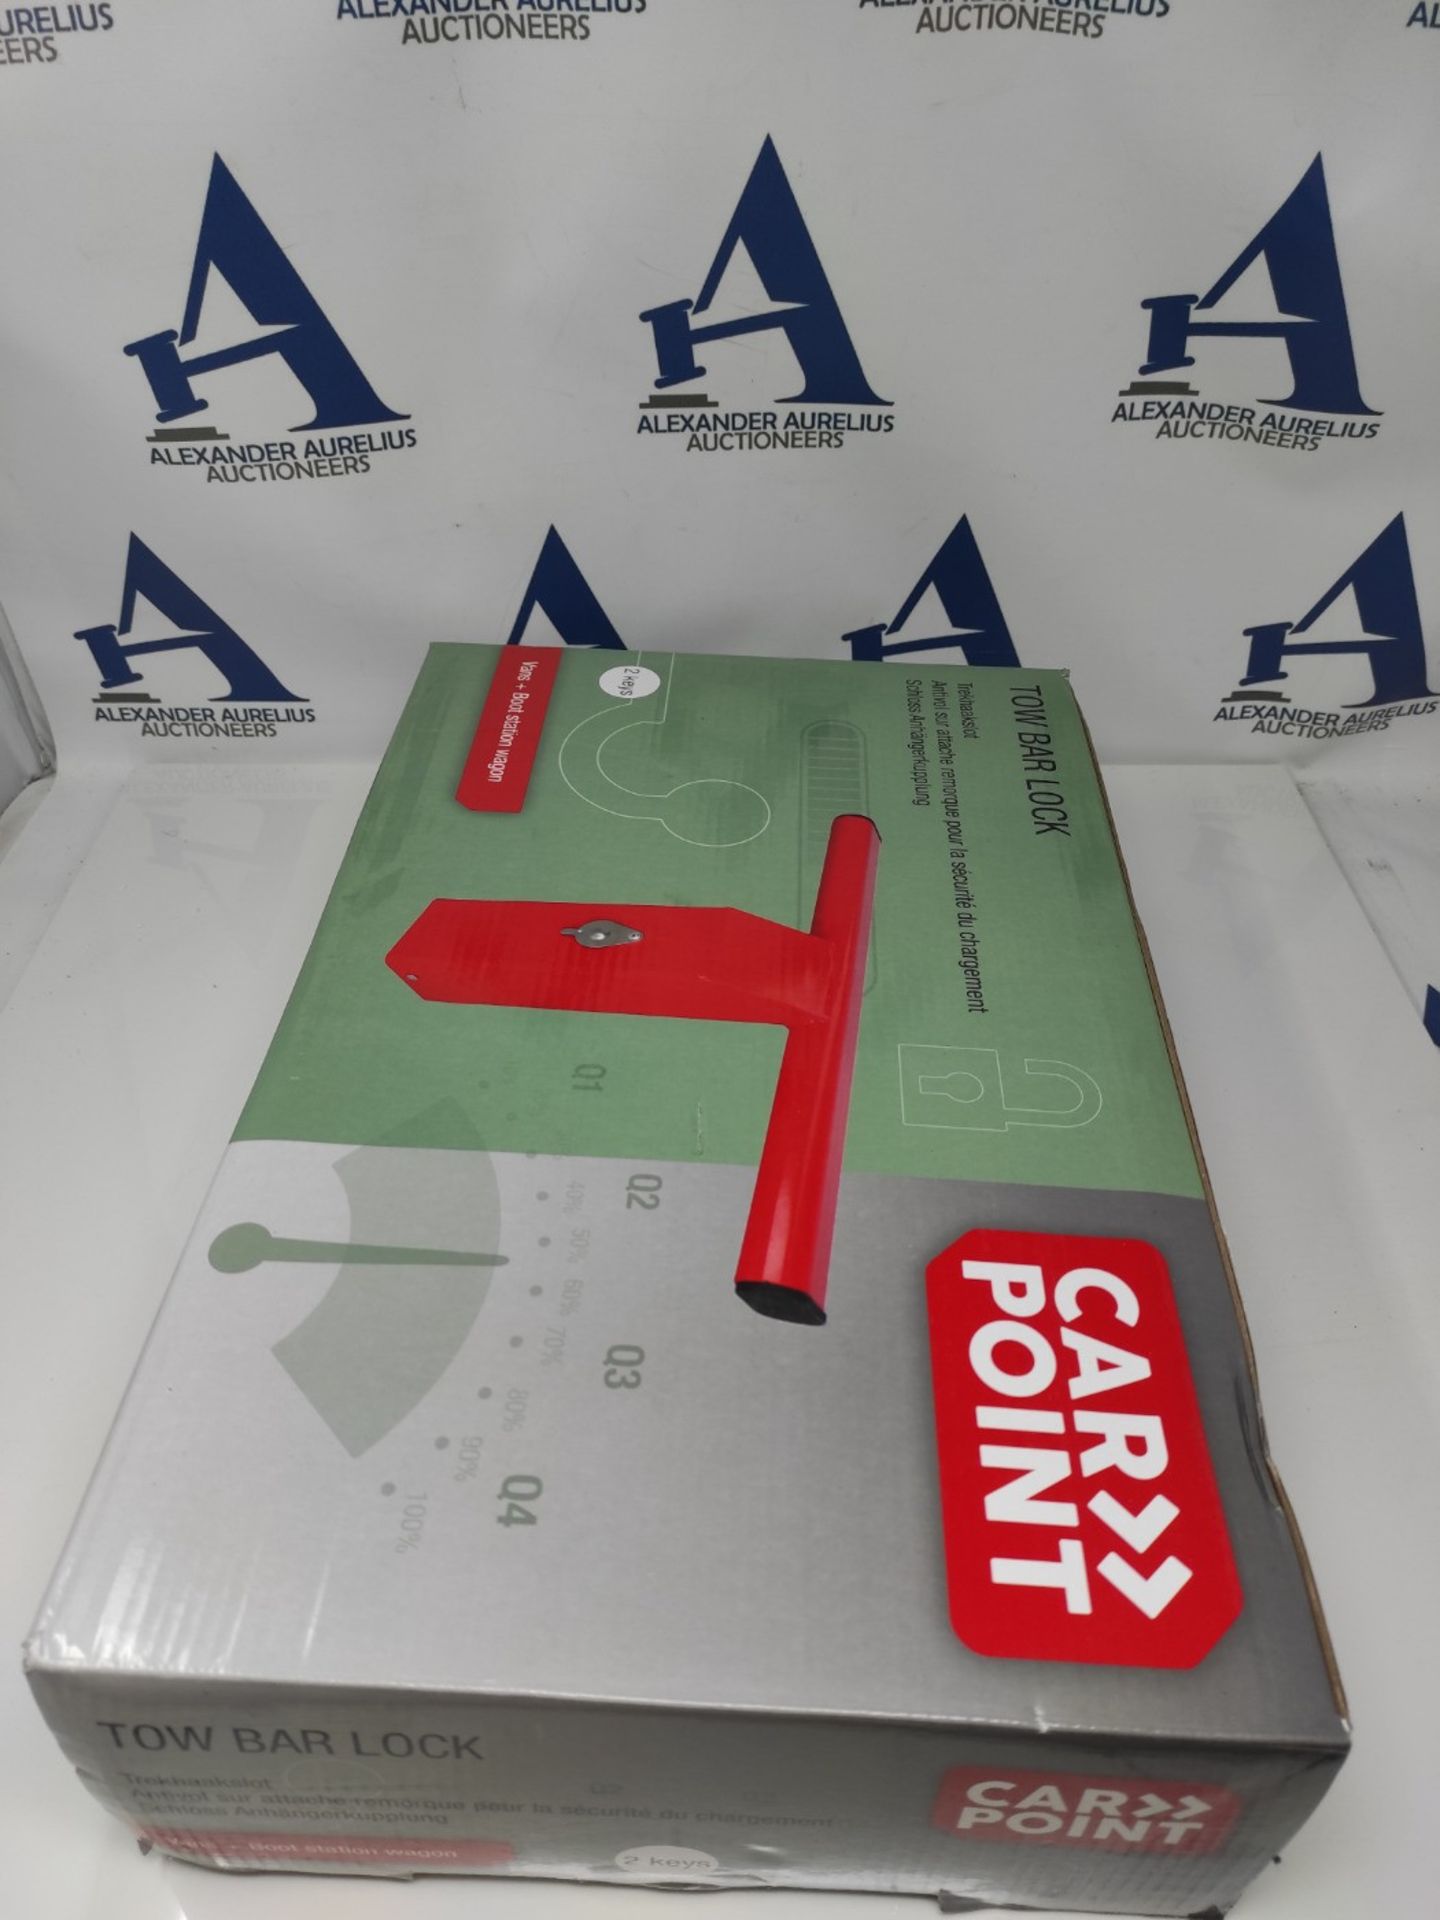 RRP £70.00 Carpoint Lock Trailer Hitch - Cargo Area Security, Red - Image 2 of 3